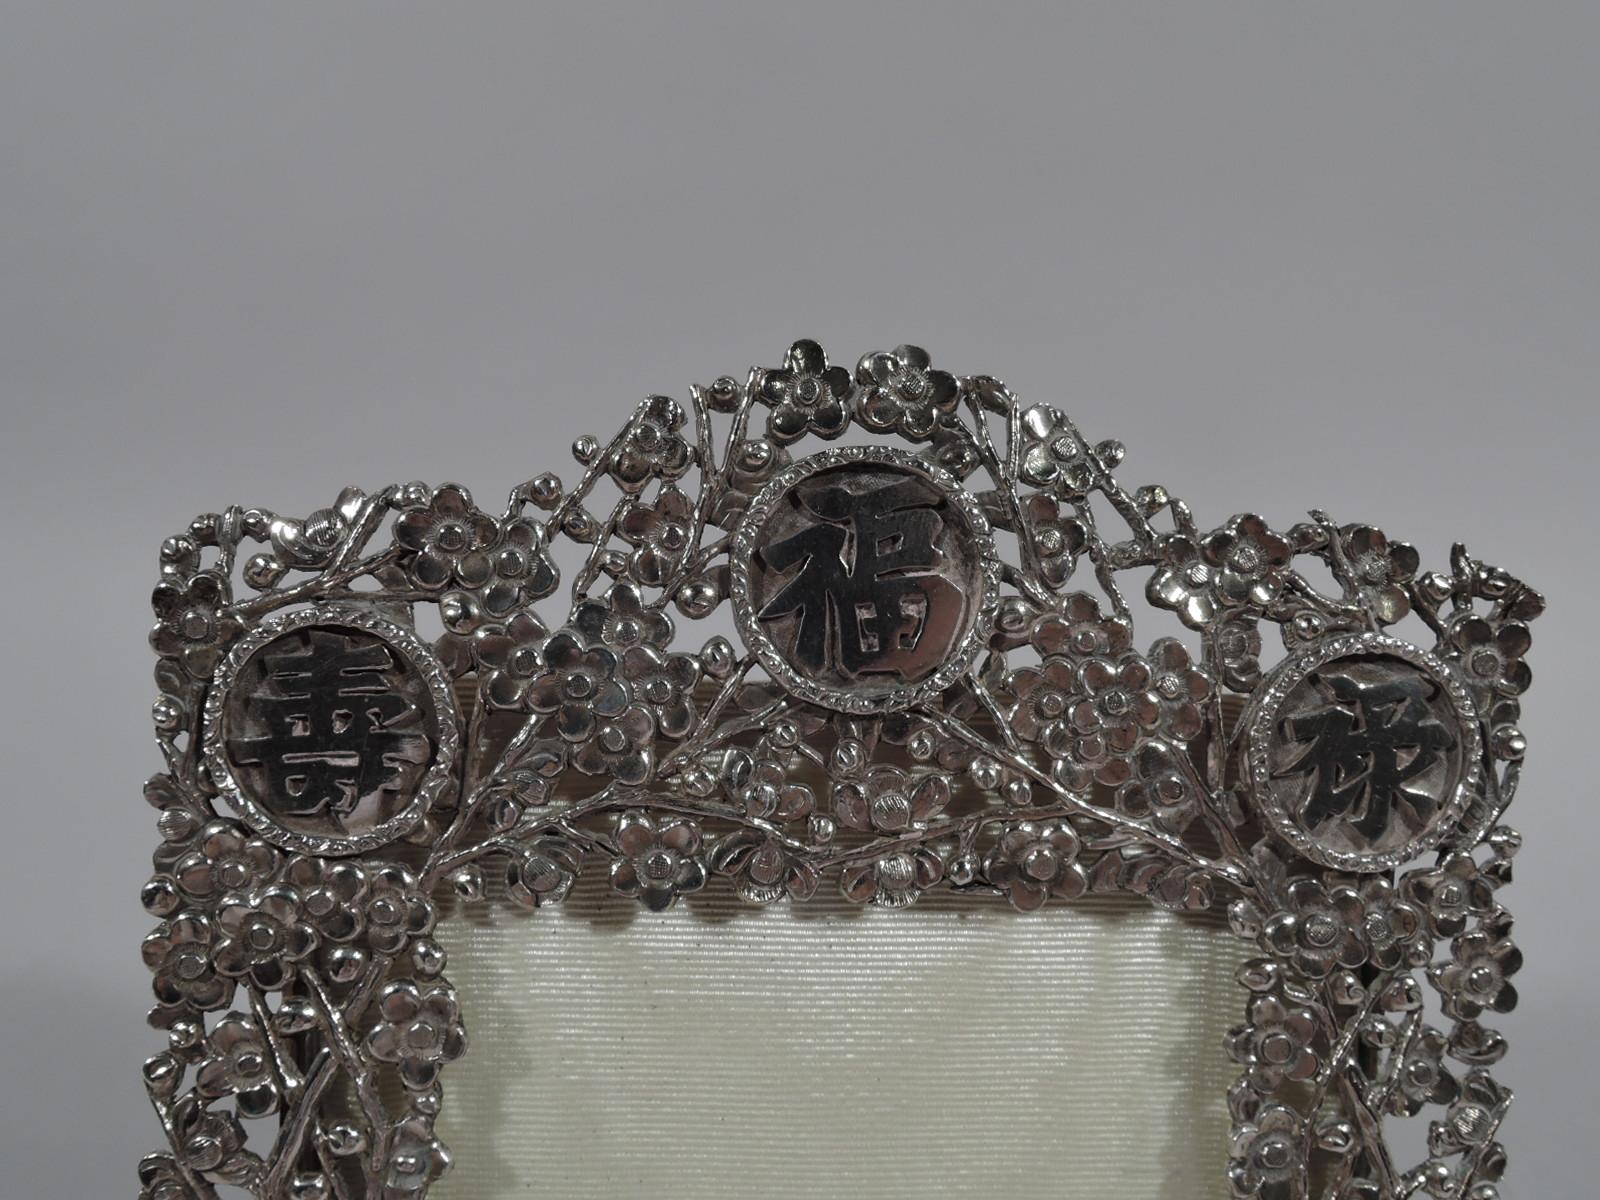 Chinese export silver picture frame. Rectangular window in same surround with arched top comprising pierced and dense blossoming prunus branches with scrolled branches at base and 3 rondels inset with Chinese characters at top. With glass, silk